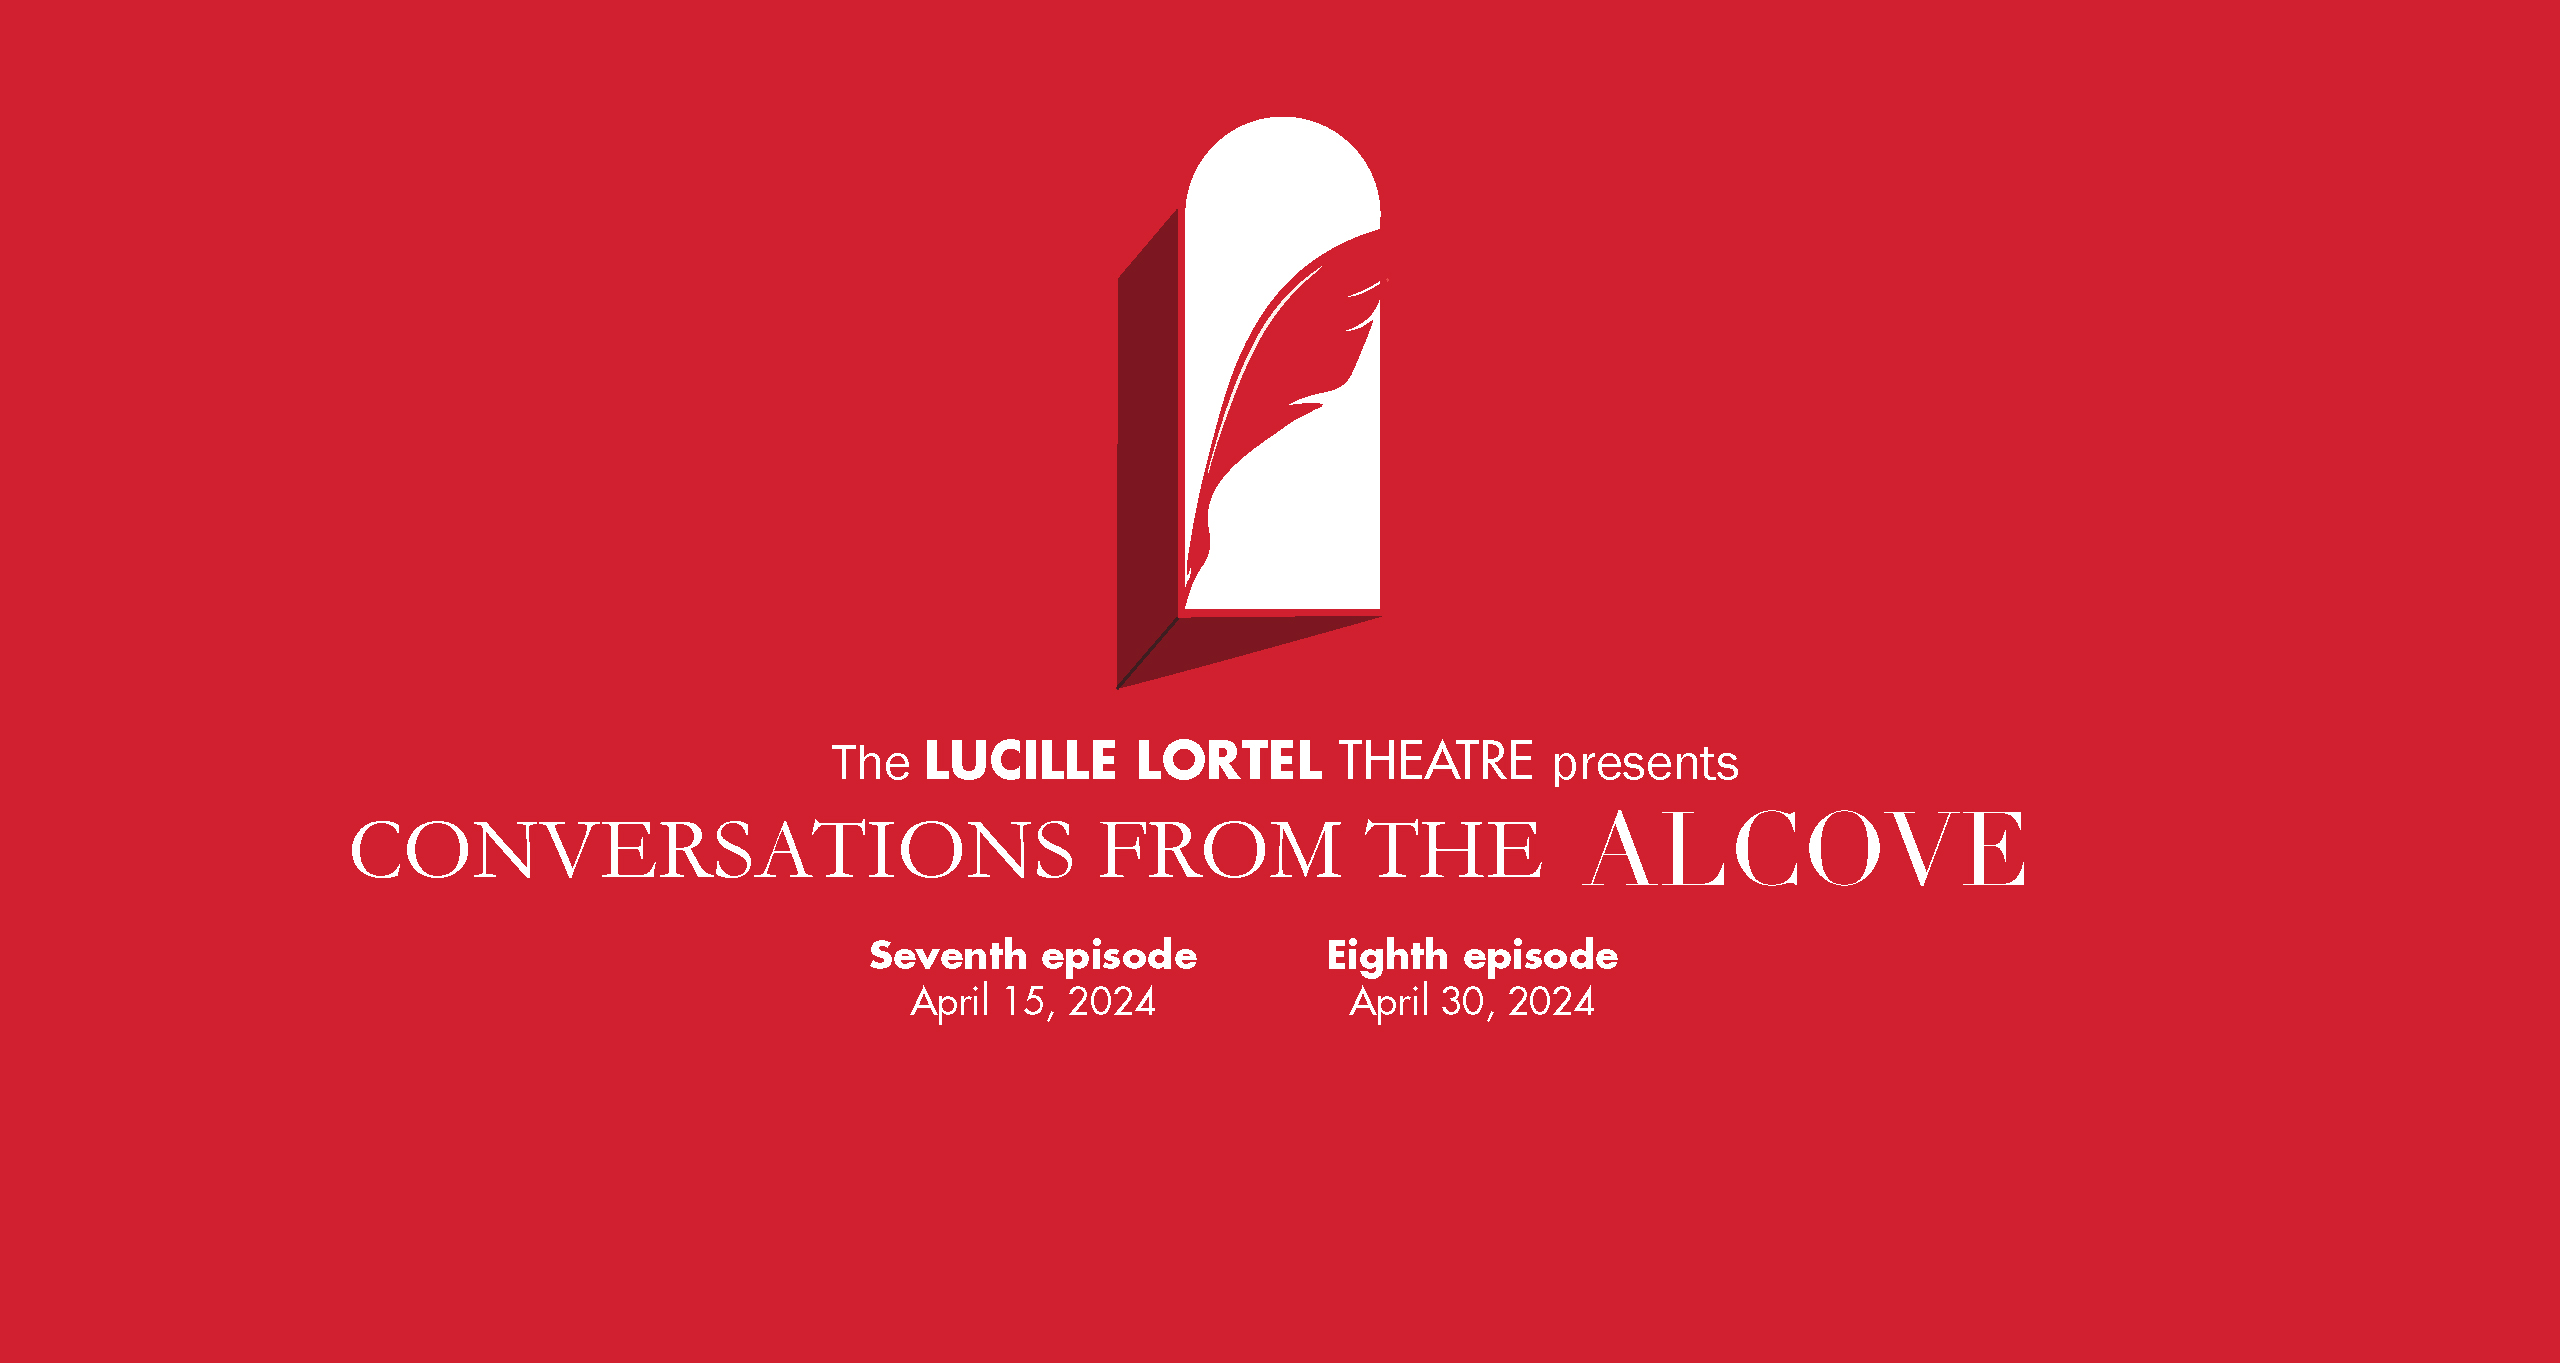 Conversations from the Alcove April release dates for the 15th and 30th